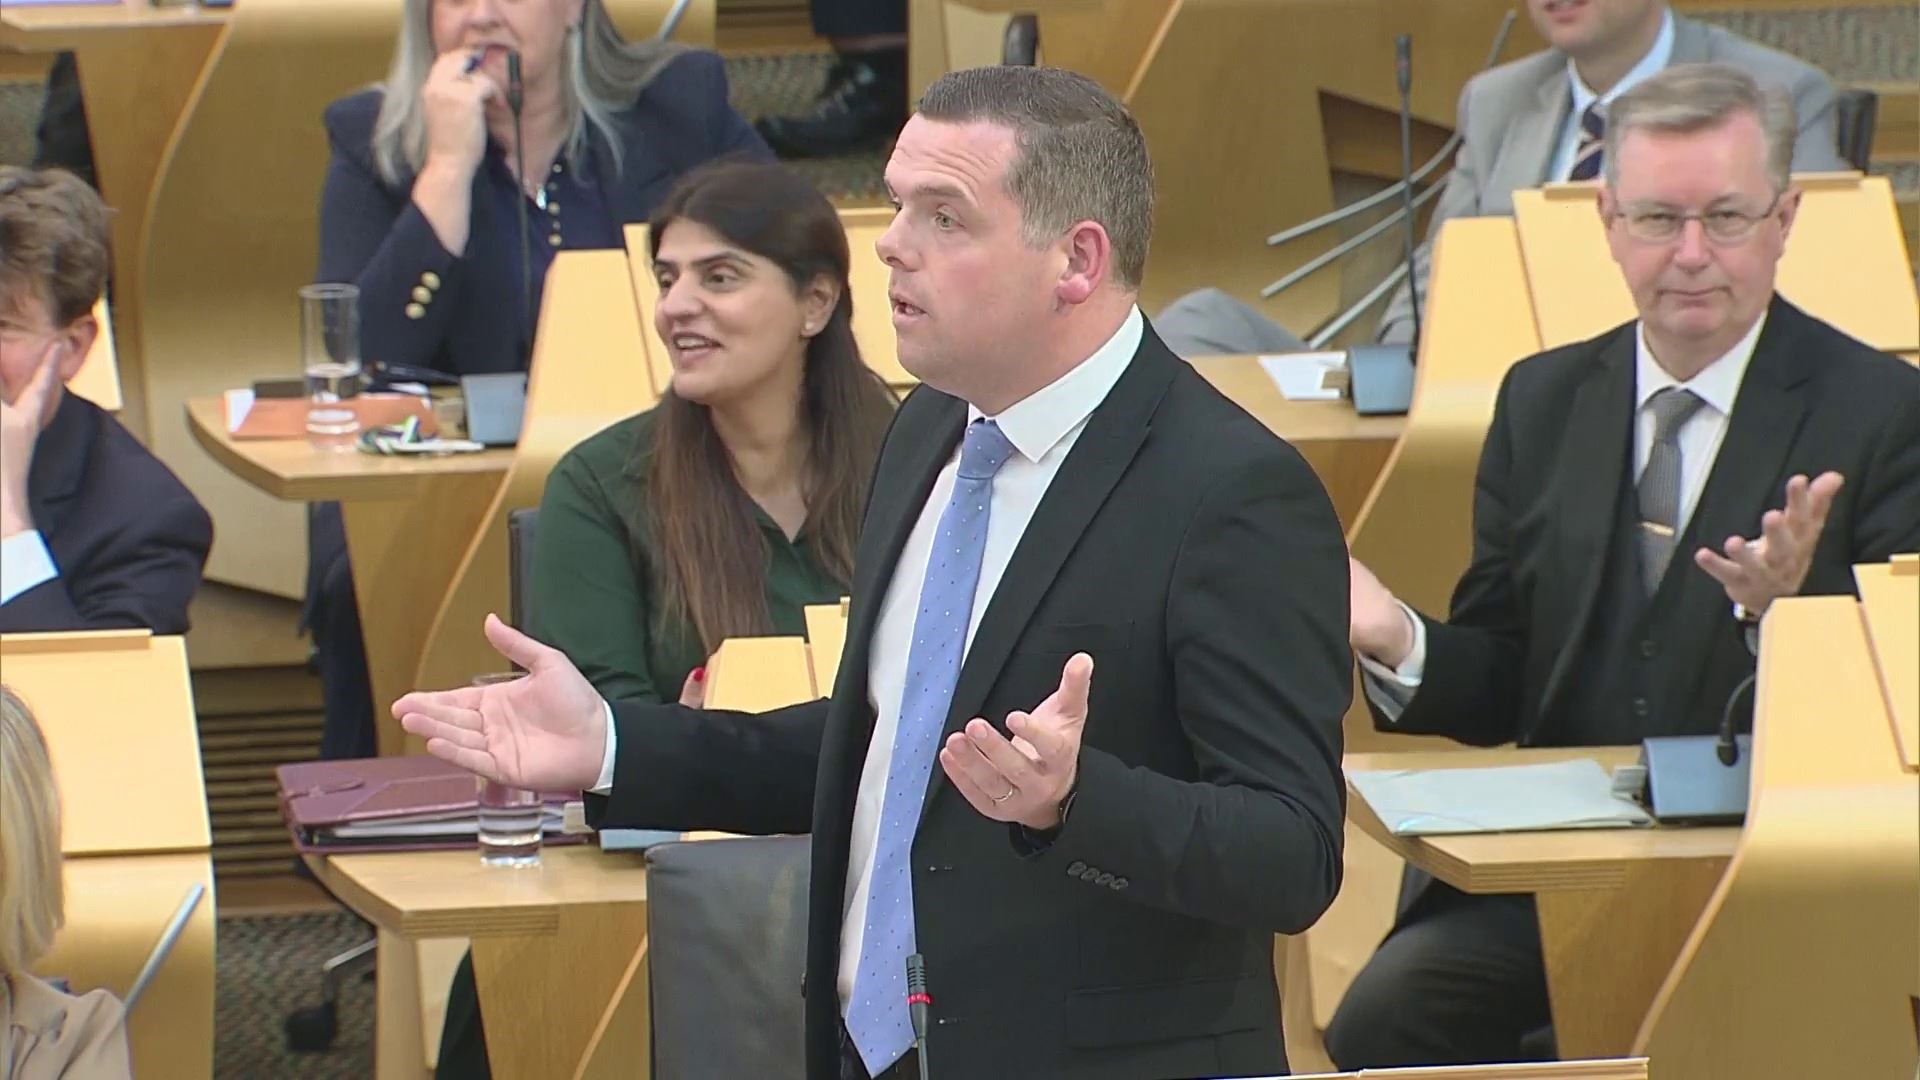 Conservative leader and Highland MSP Douglas Ross offering Humza Yousaf an intervention.